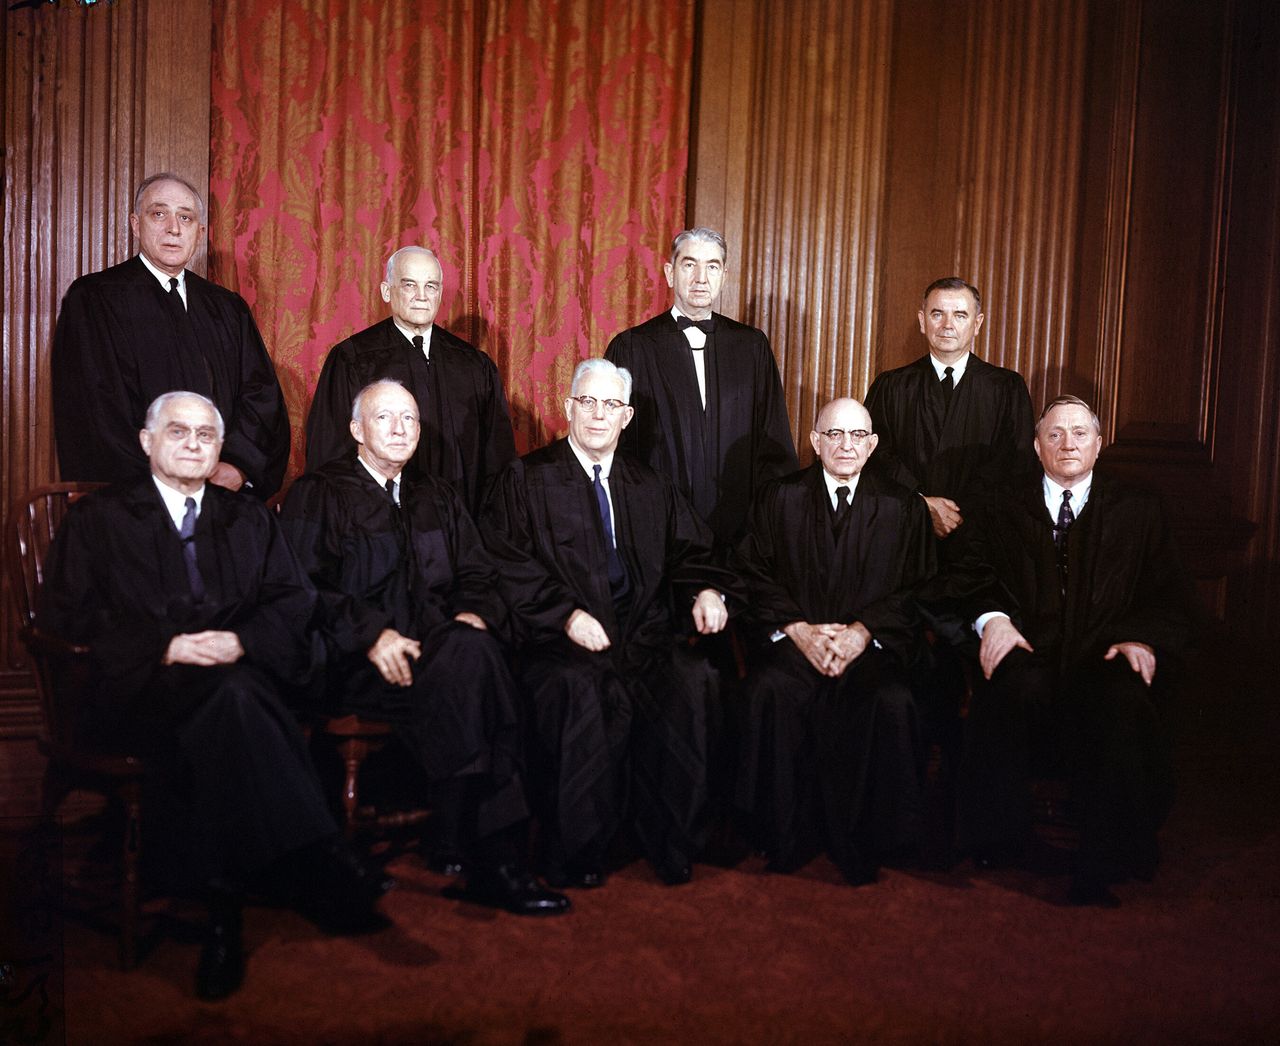 The Supreme Court in 1957 when it ruled on Watkins v. United States.